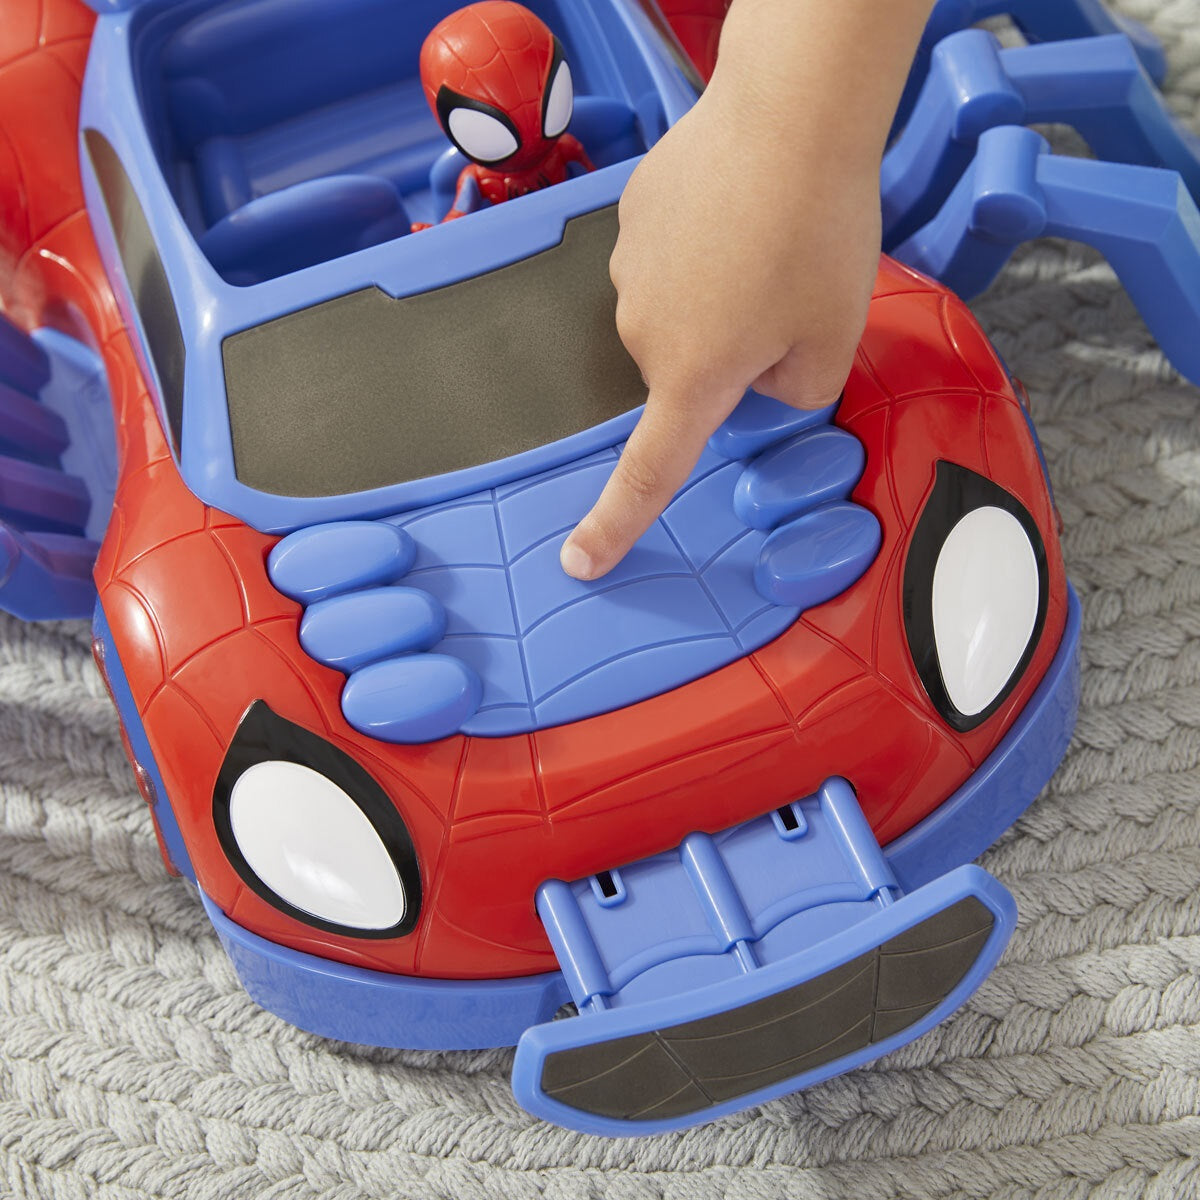 Marvel Spidey and His Amazing Friends: Ultimate Web-Crawler Vehicle and 4' Spidey Figure